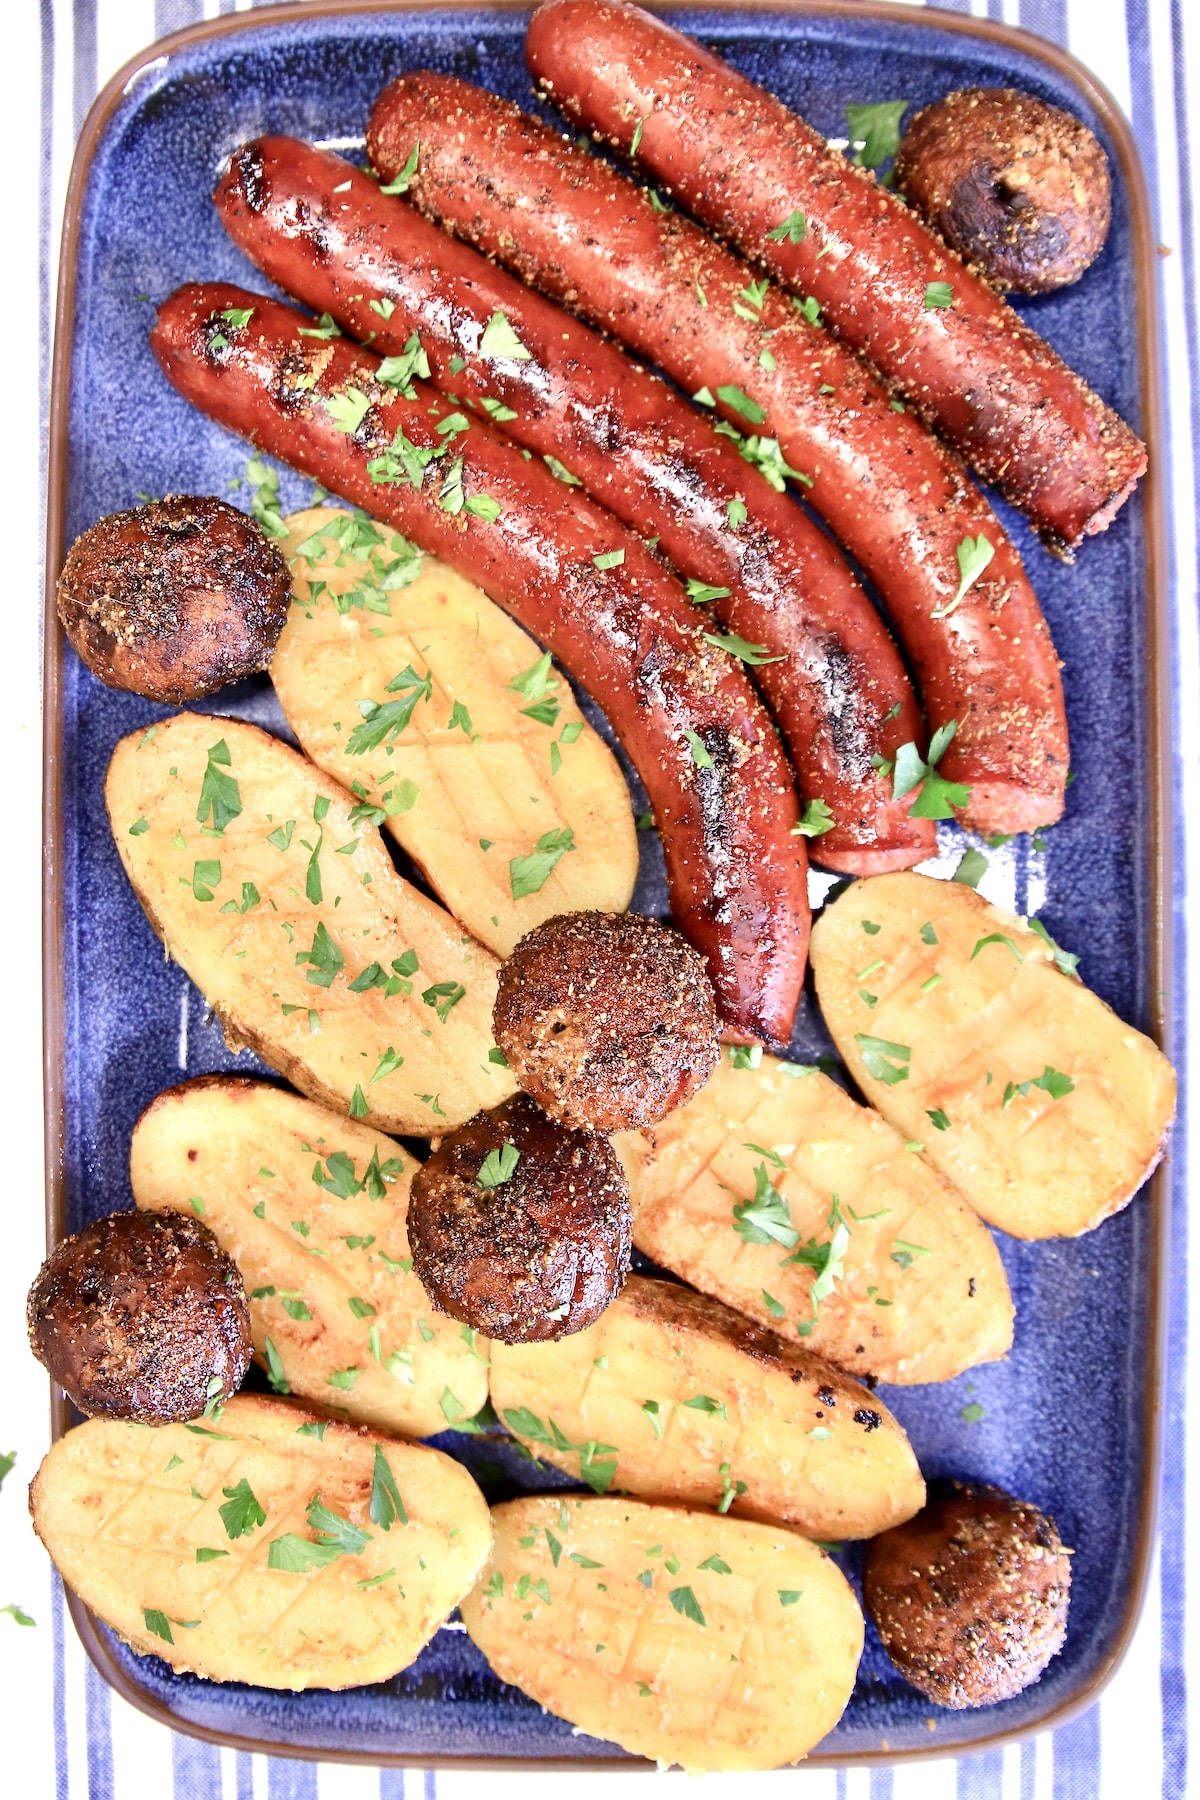 Platter with grilled smoked sausage links, mushrooms, baked potato halves.